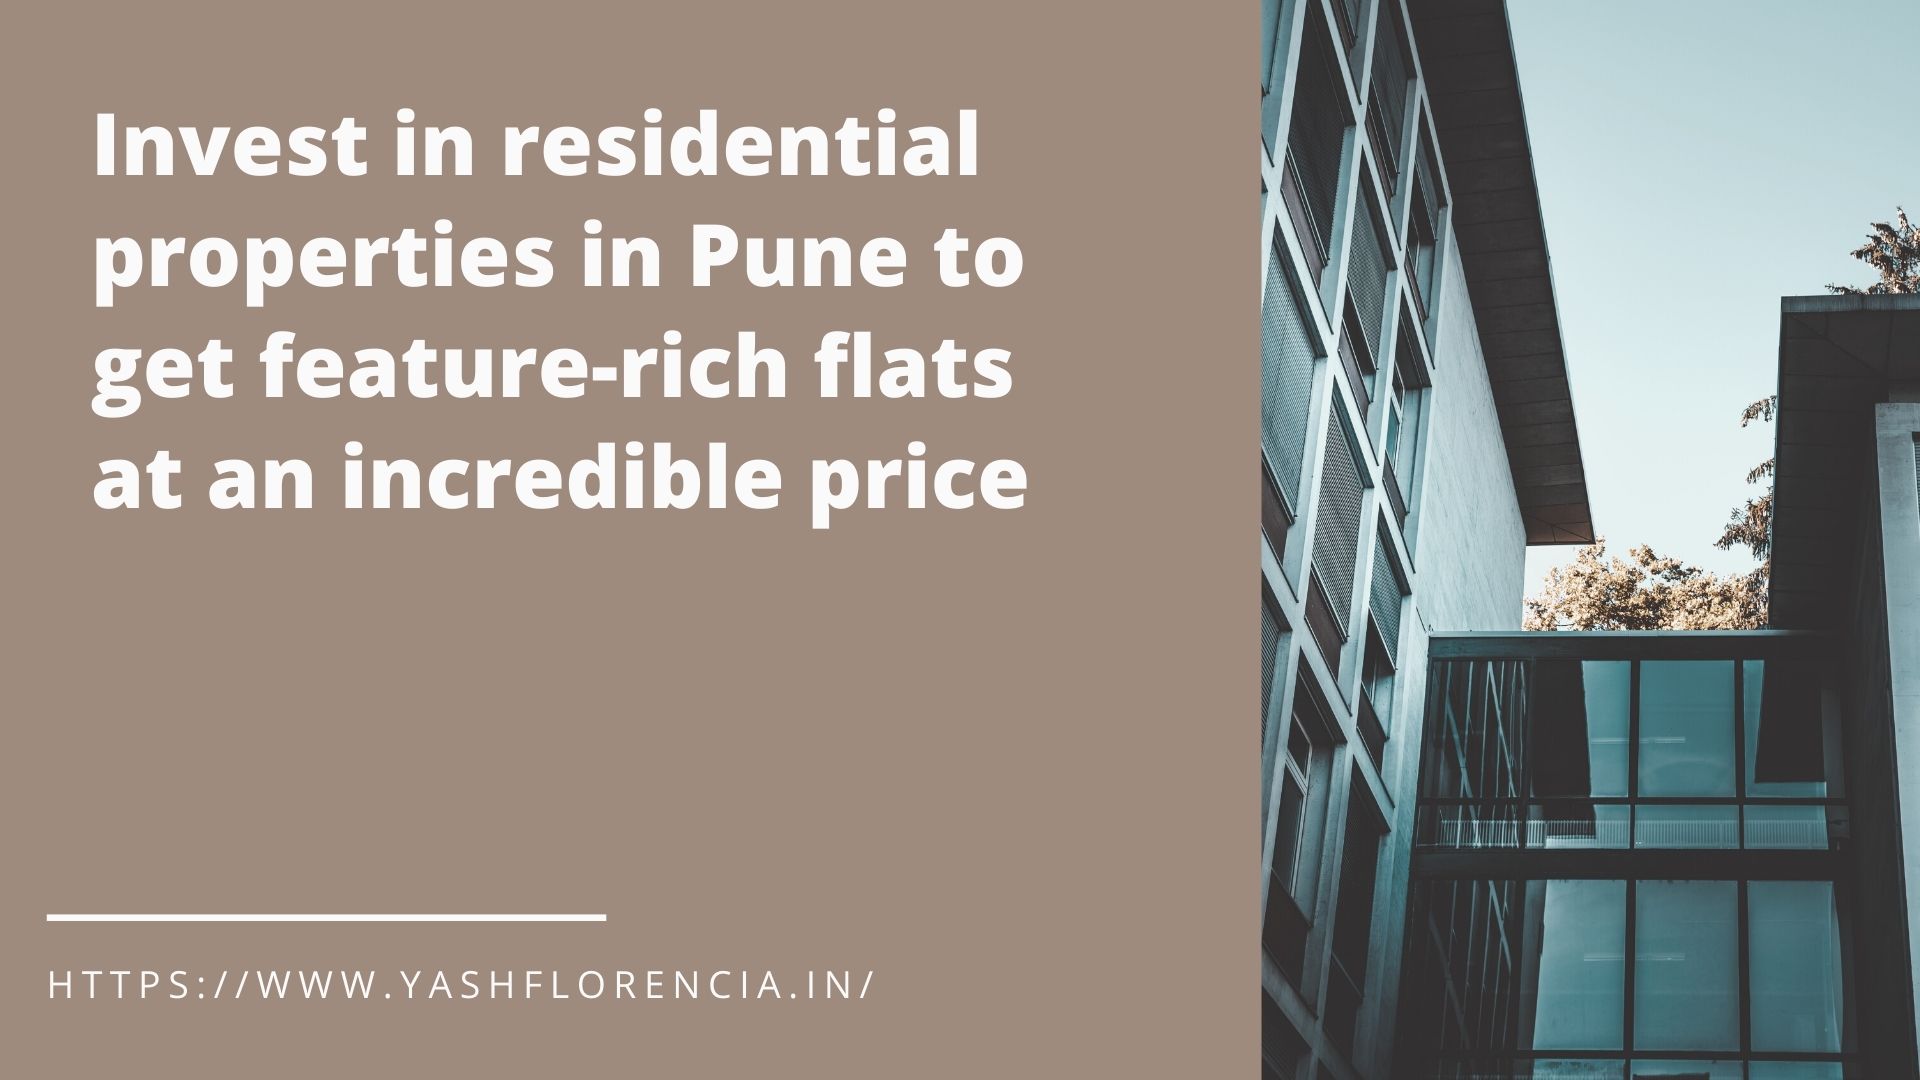 Invest in residential properties in Pune to get feature-rich flats at an incredible price